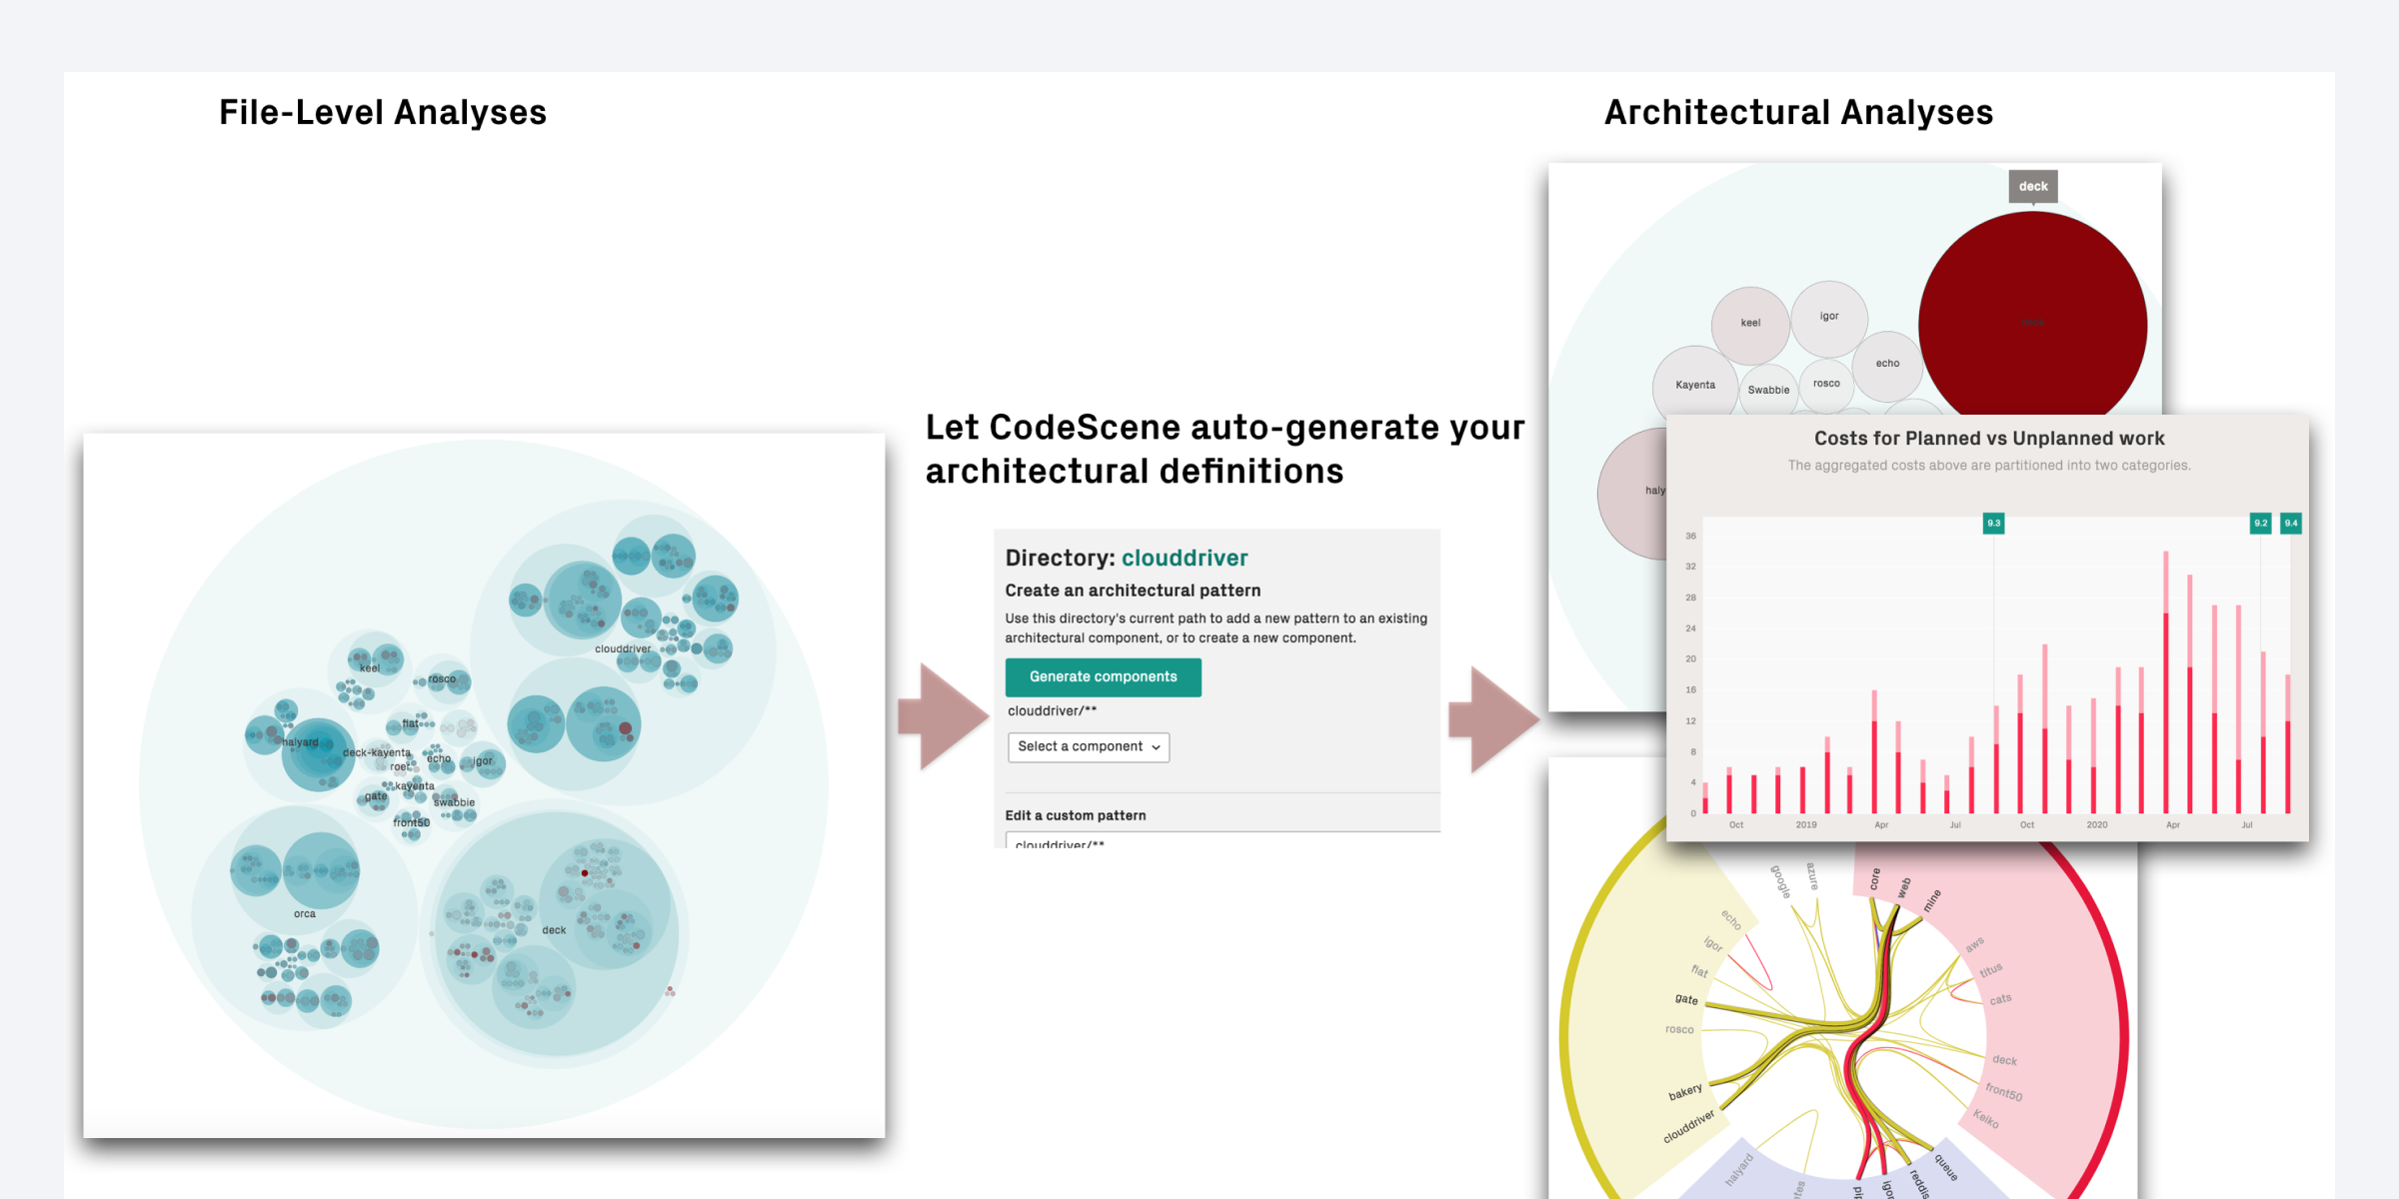 Graphs showing how CodeScene auto-generates your architectural definitions so that you can analyse hotspots, coupling, and knowledge distribution on a system level.